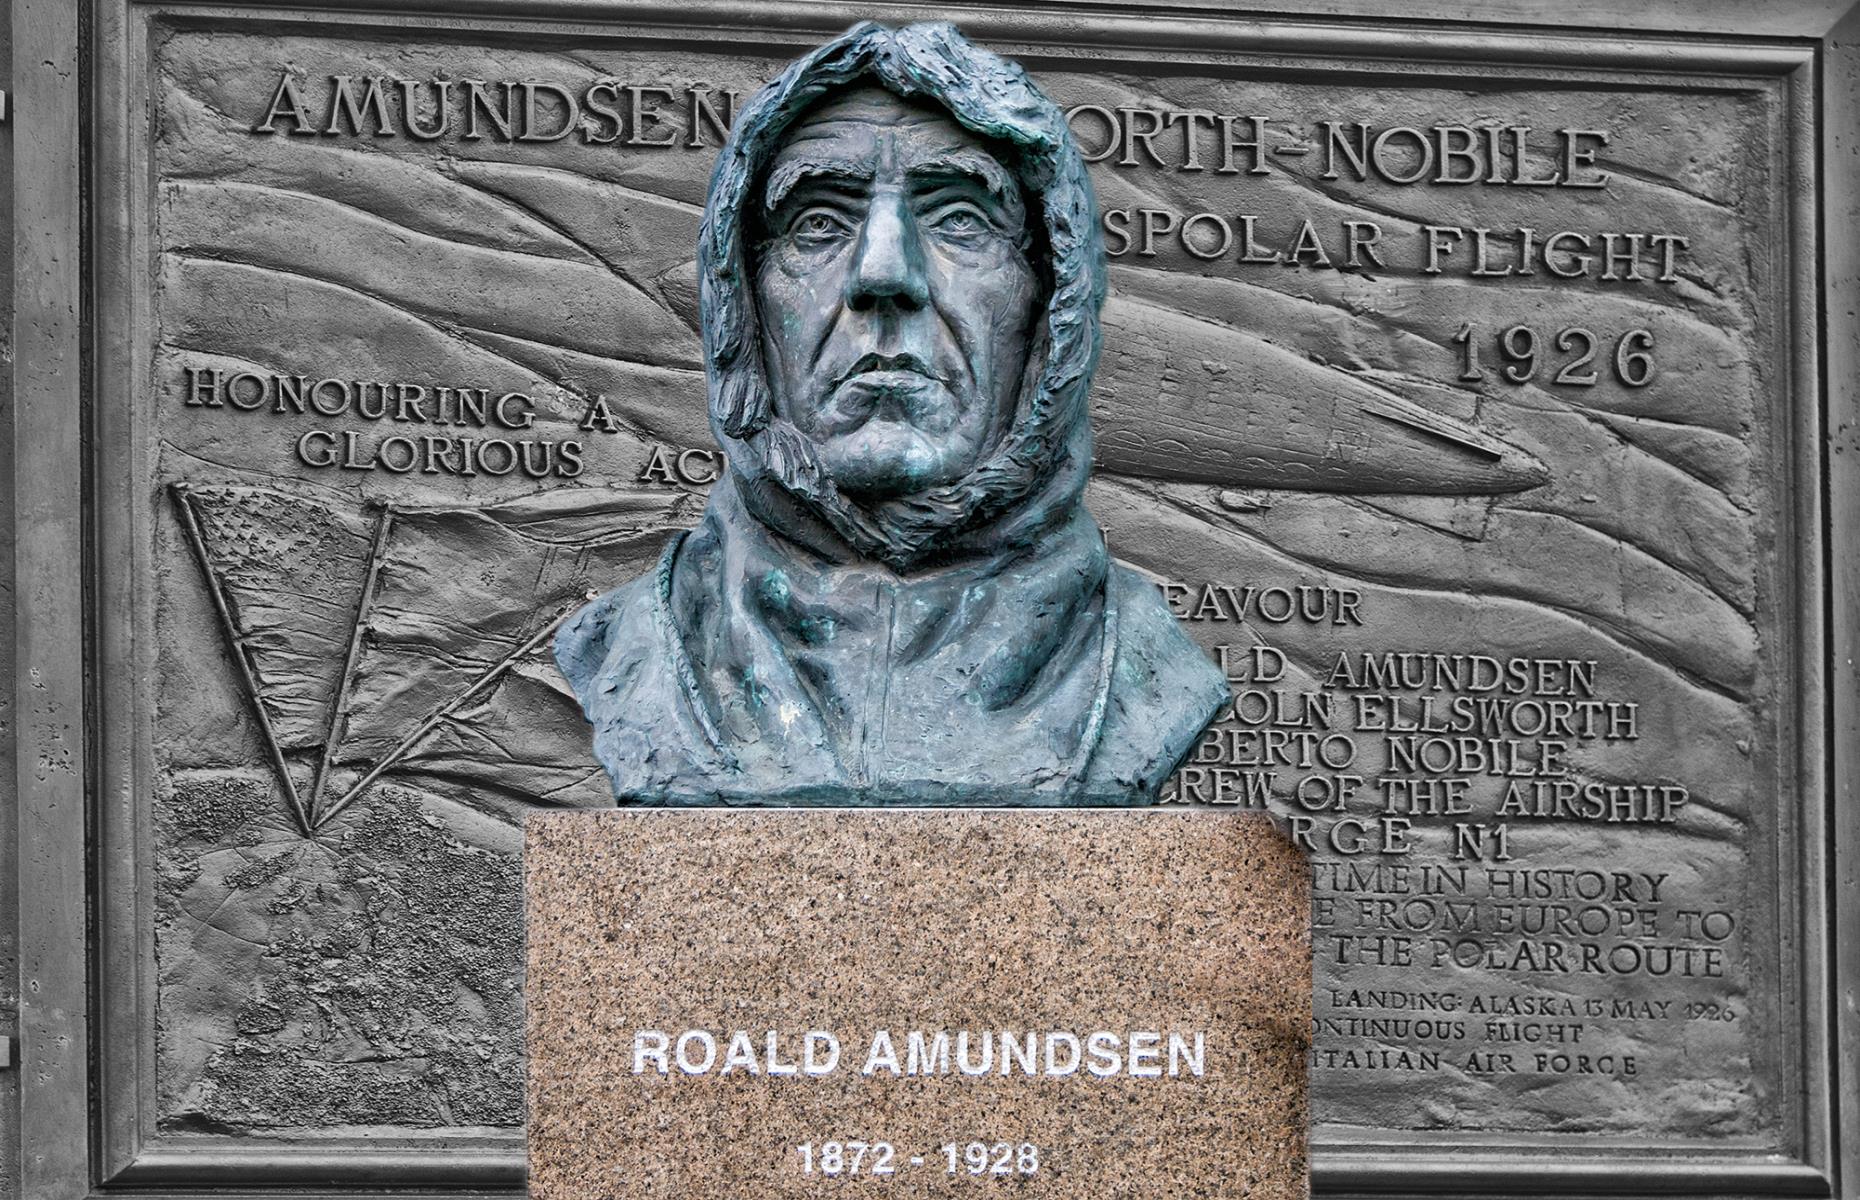 By the end of the 19th century, most land masses on Earth had been explored with the exception of the polar regions. While many attempts had been made to reach the Arctic and Antarctic, it wasn’t until 1911 that Norwegian Roald Amundsen became the first person to reach the South Pole. Americans Frederick Cook and Robert Peary made disputed claims to reach the North Pole in 1908 but the first scientifically-proven expedition was also by Amundsen in 1926.